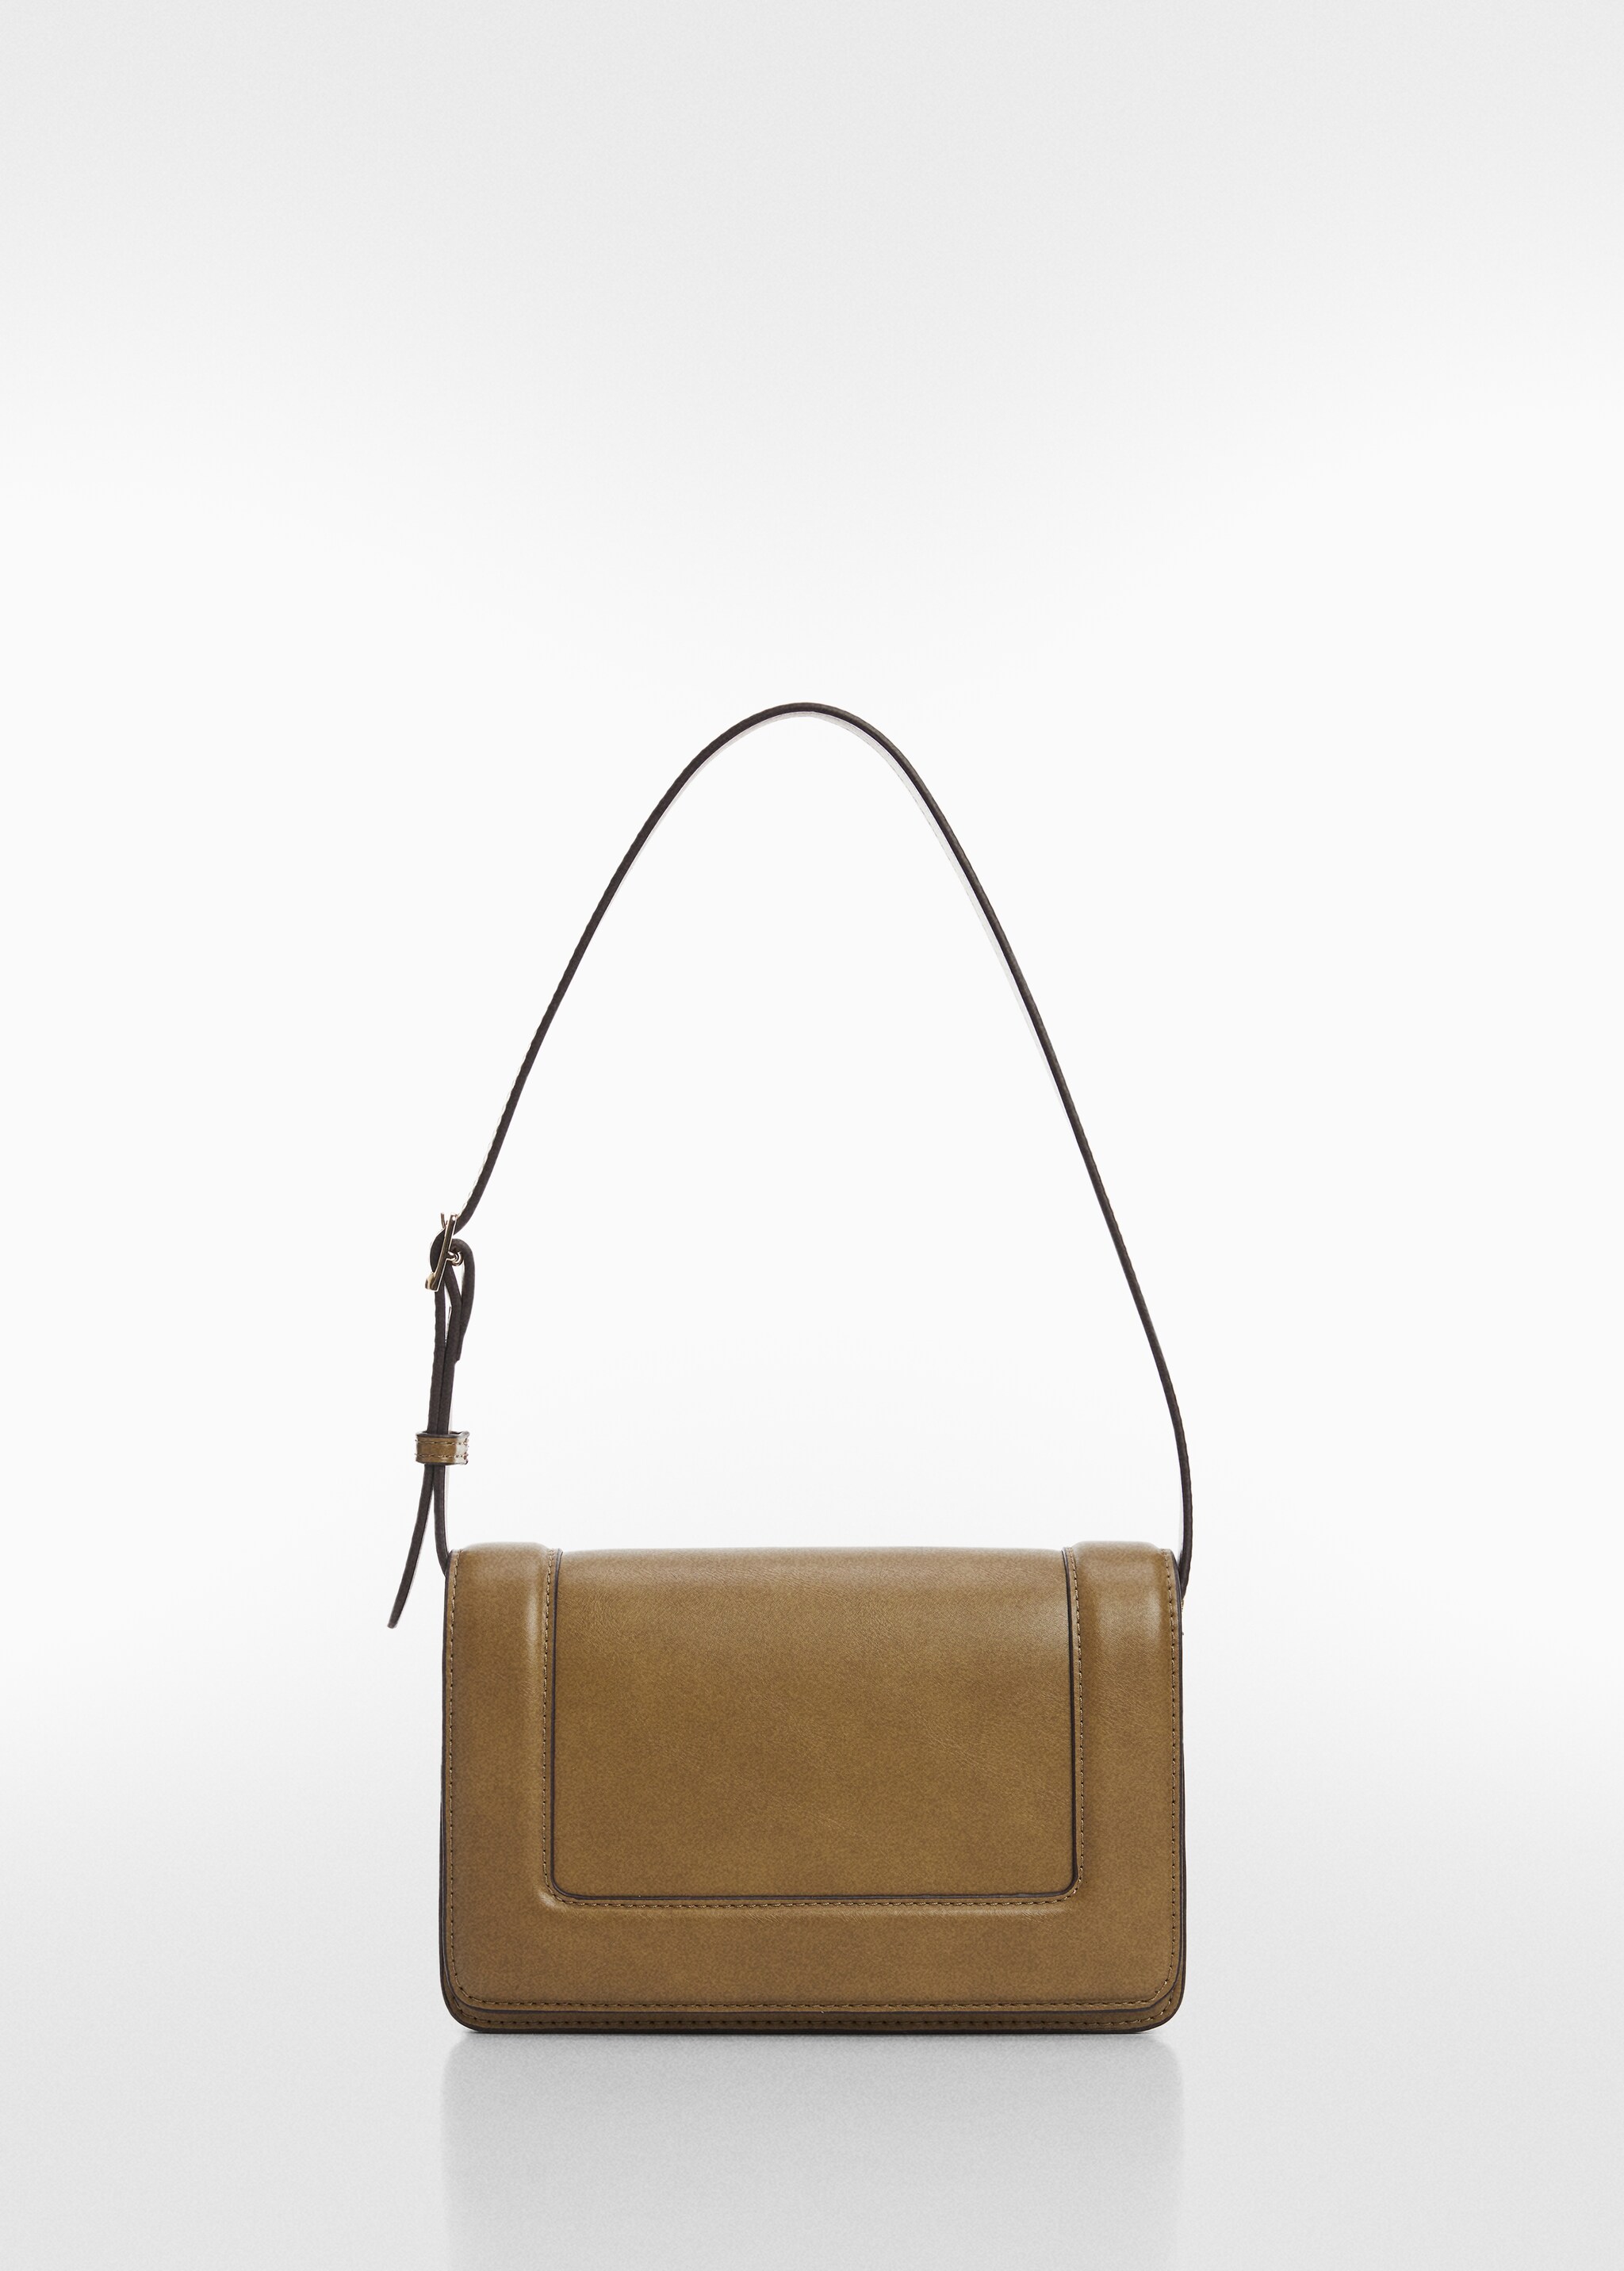 Crossbody bag with flap - Article without model